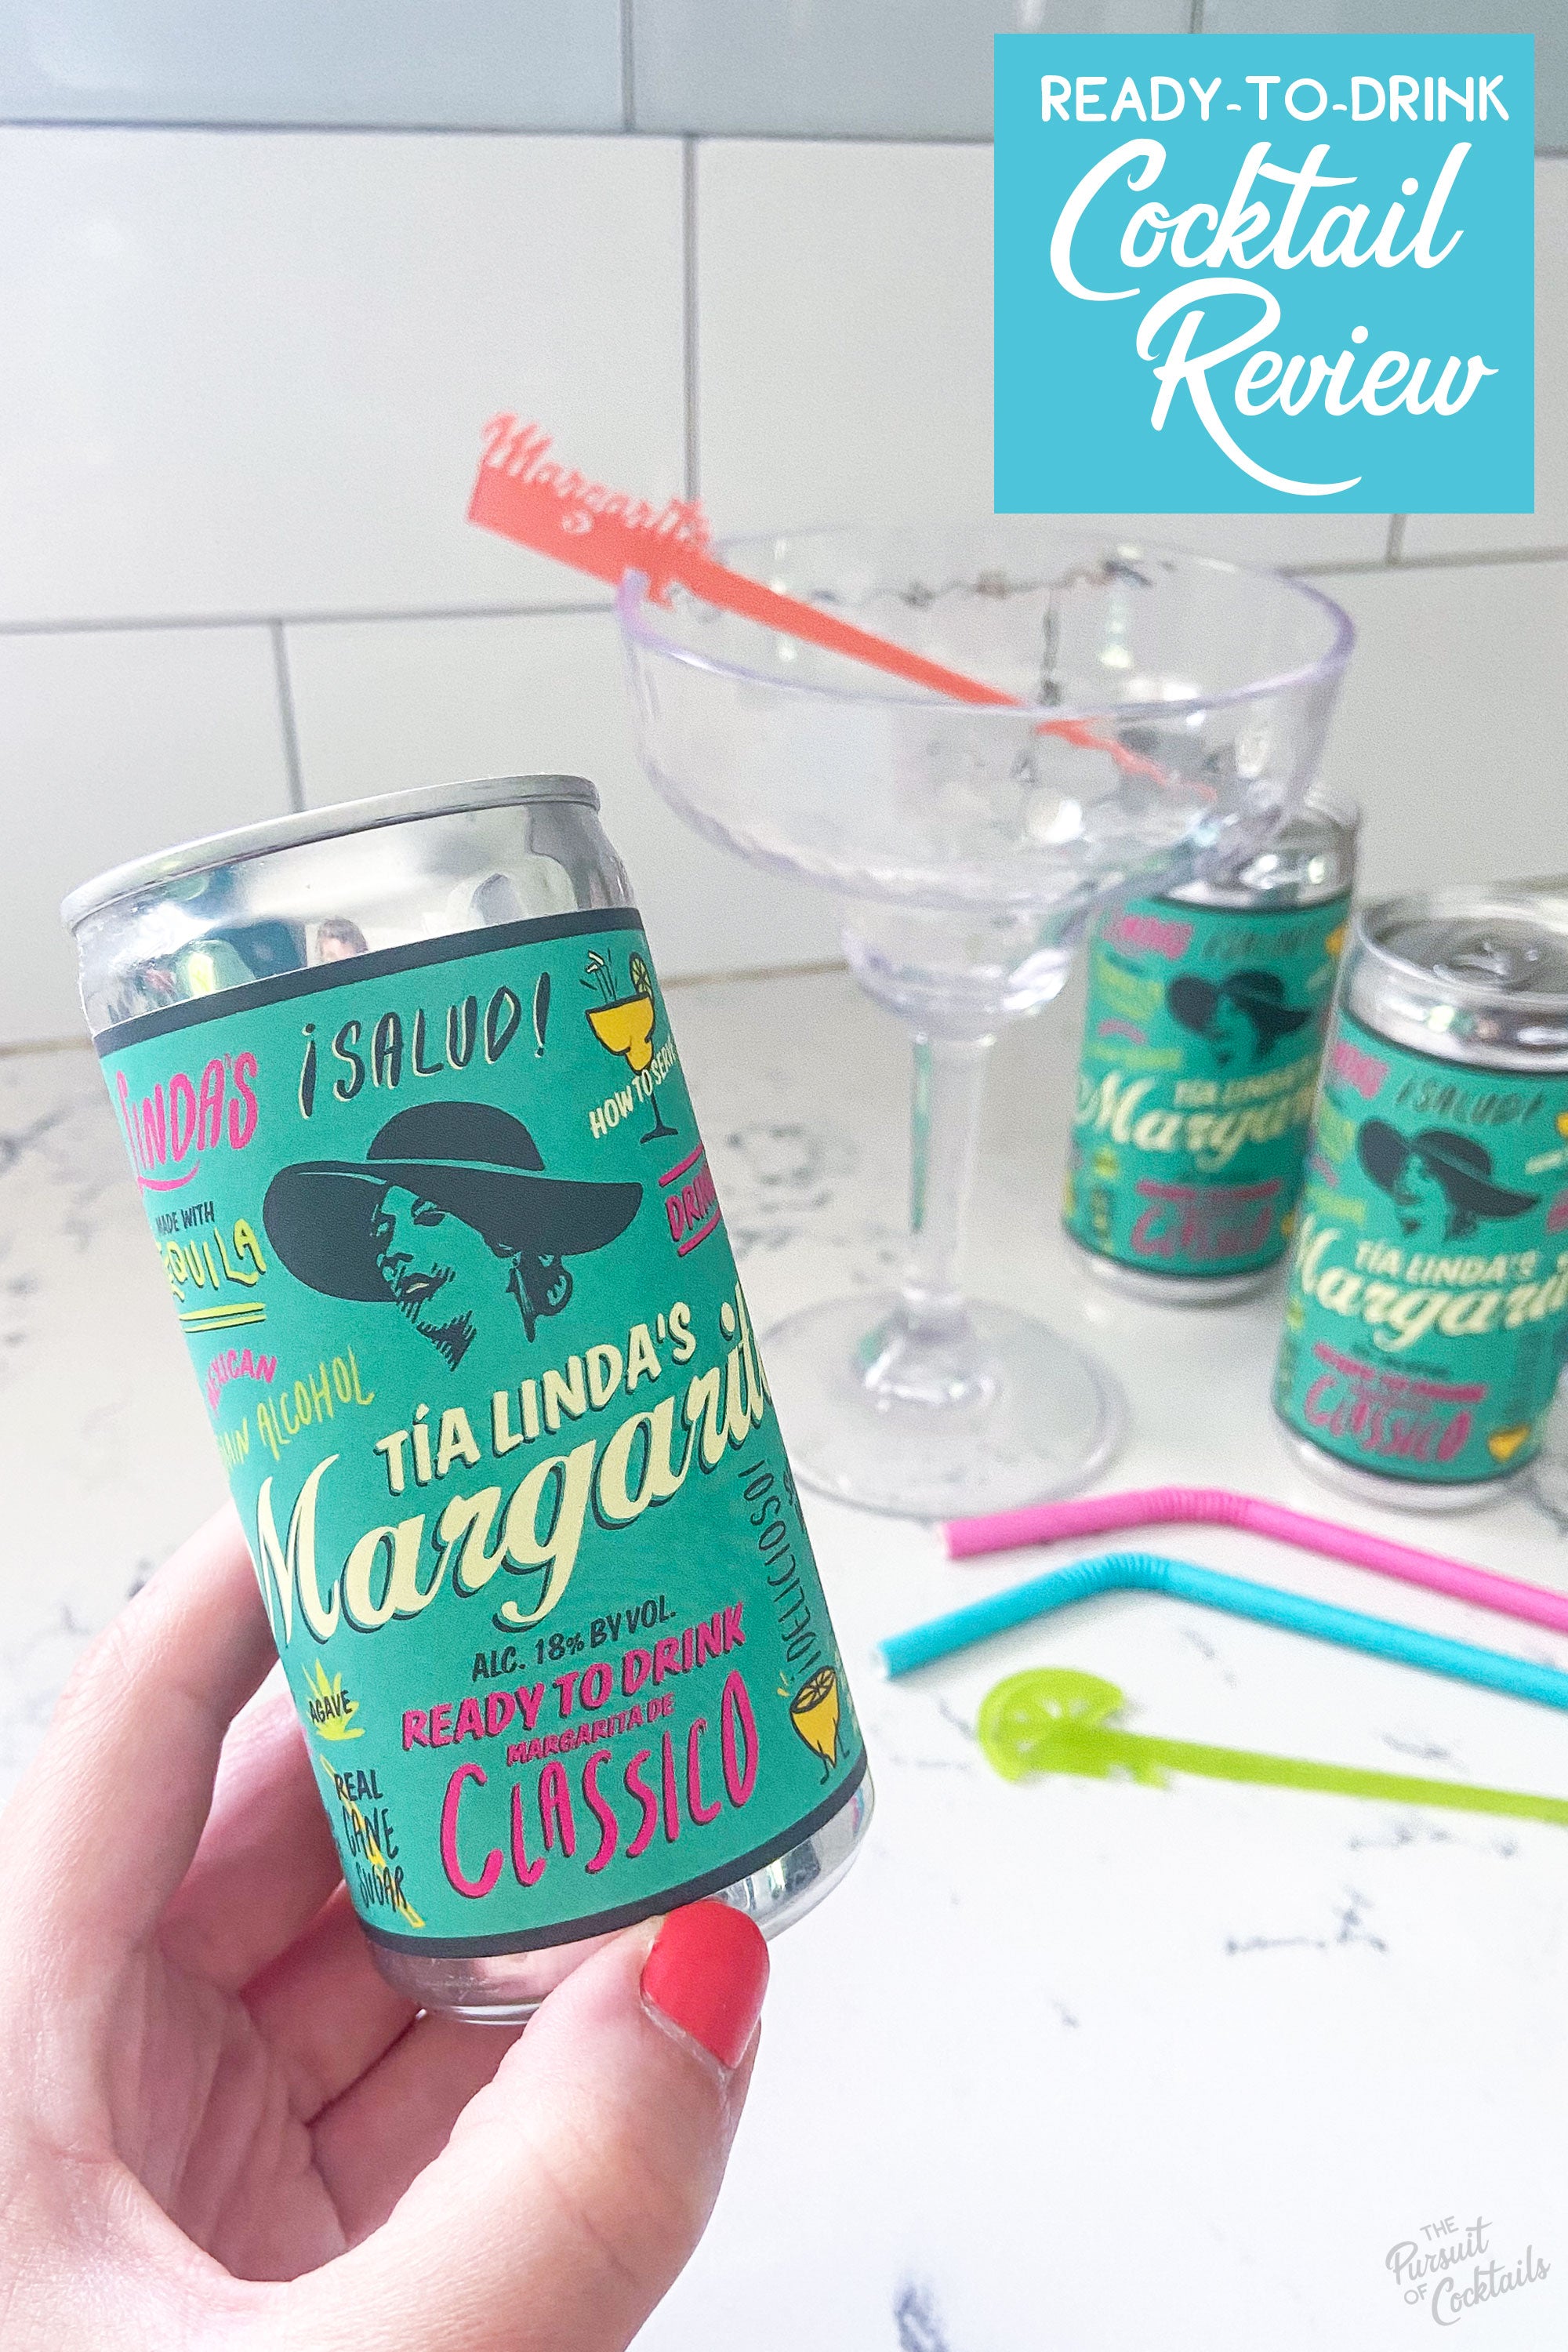 https://cdn.shopify.com/s/files/1/0251/4949/files/Tia-Linda_s-ready-to-drink-margarita-review-by-The-Pursuit-of-Cocktails_37fce258-26eb-476f-b027-e465ff6e7c8a.jpg?v=1654883239